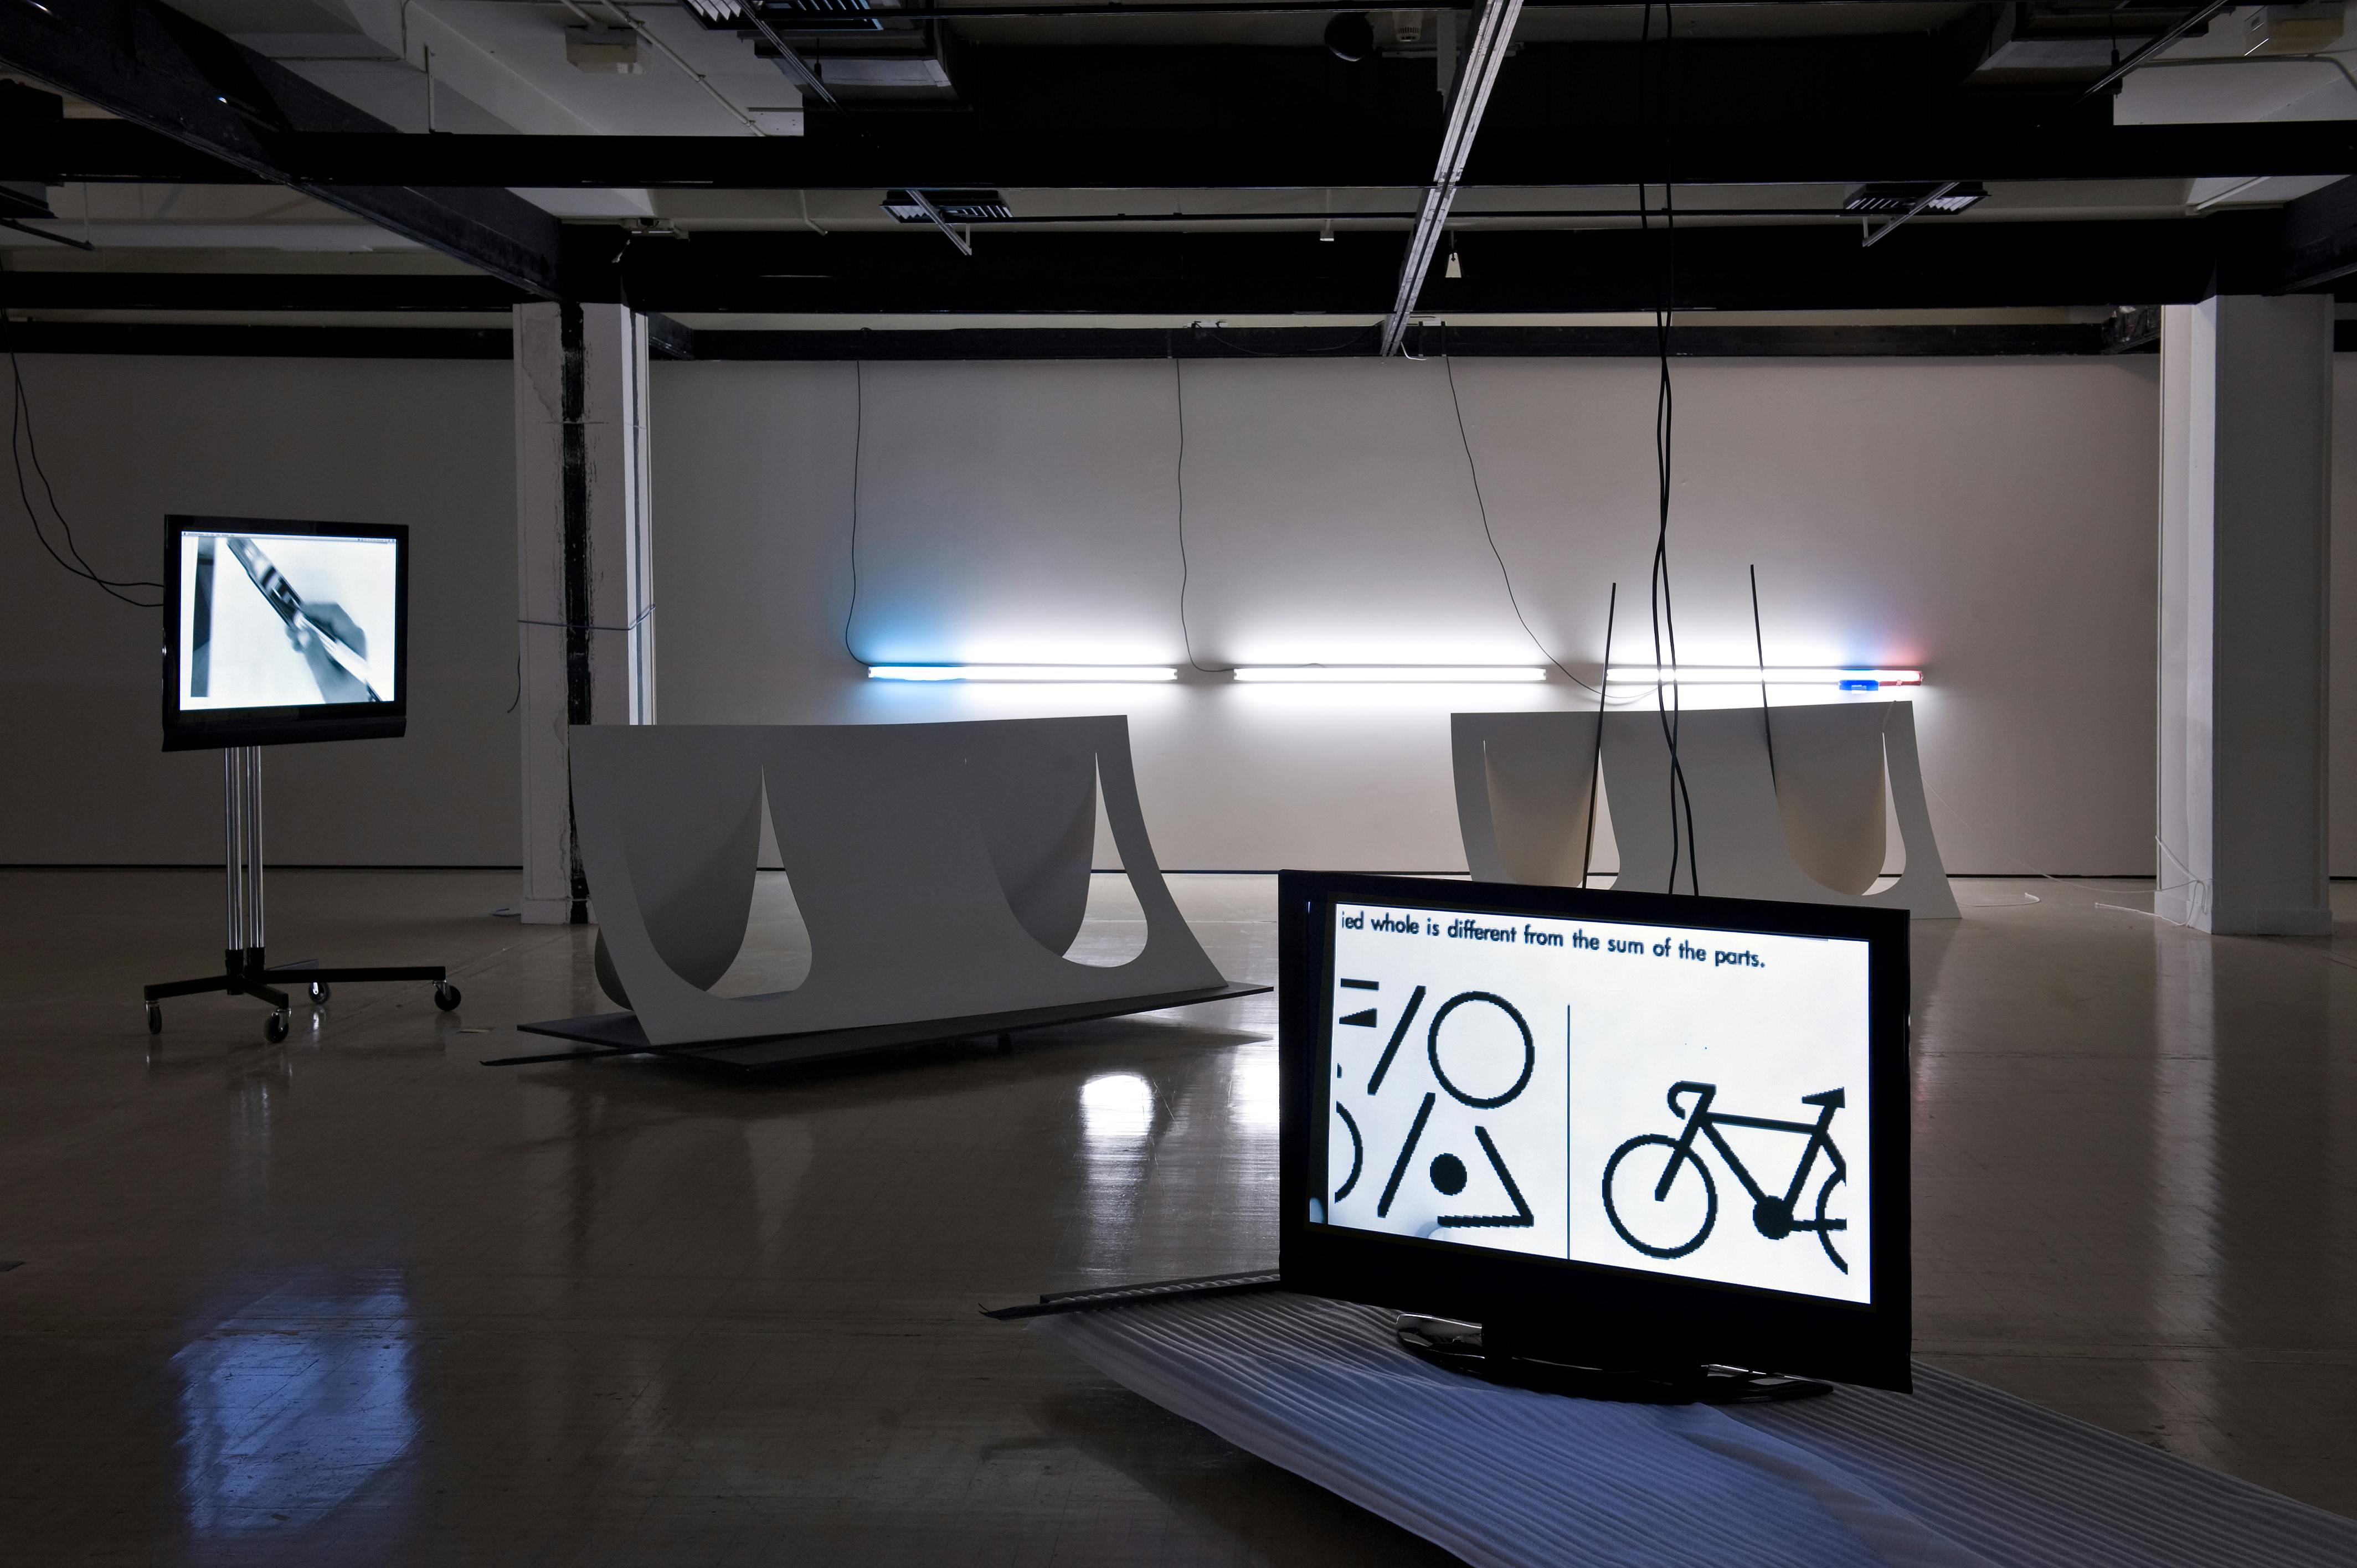 An installation in a darkened gallery. In the foreground a flat TV screen is on the floor. The background strip lighting is fixed horizontally on the wall casting strong shadows. 